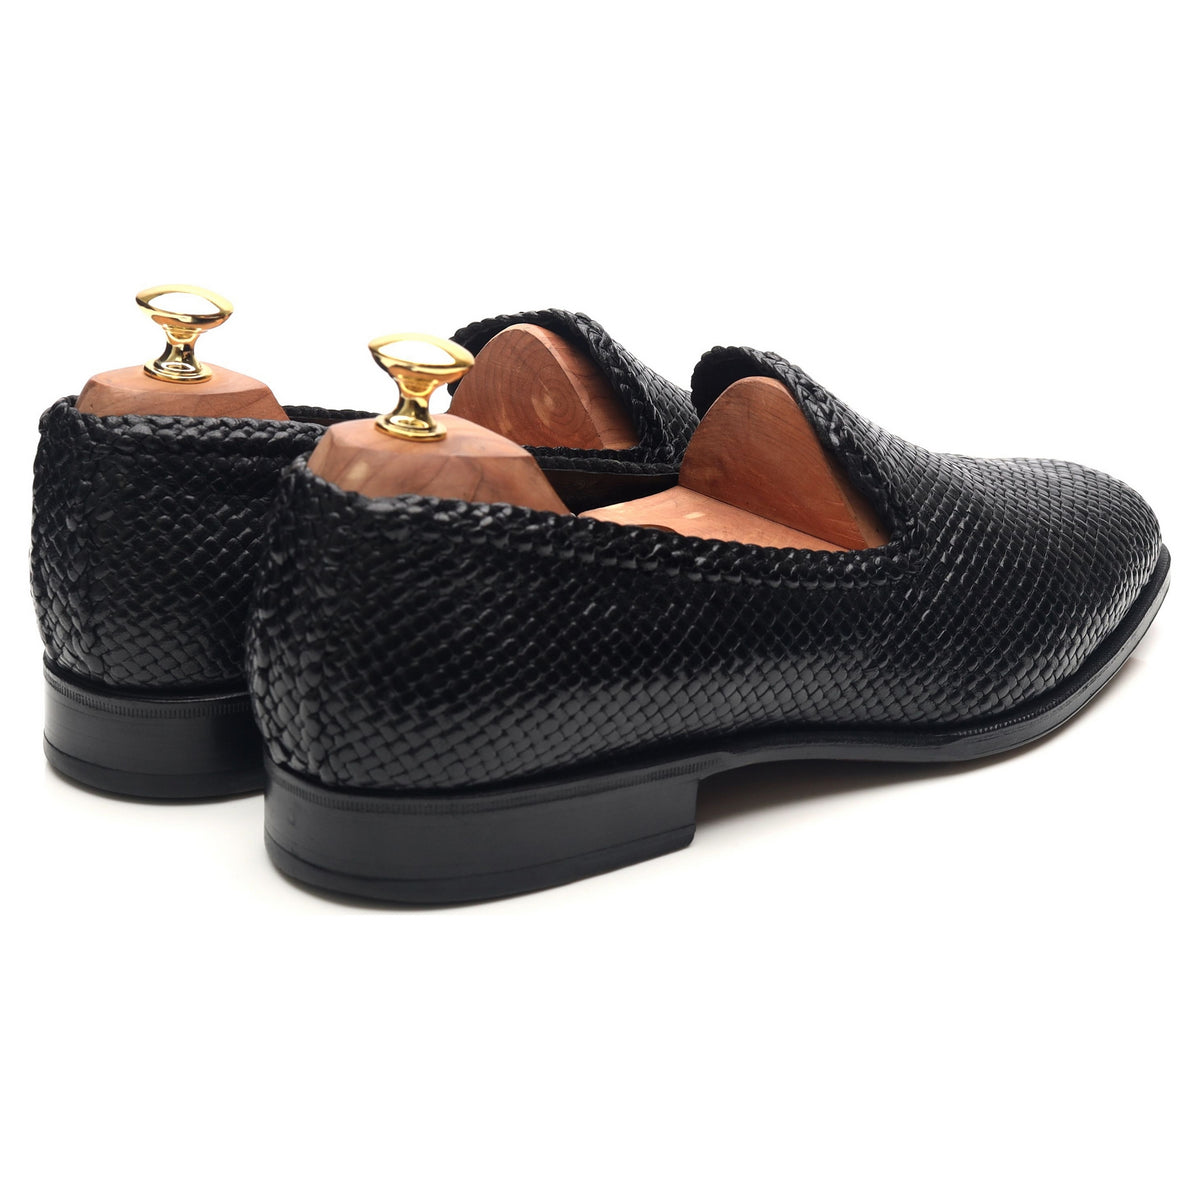 Black Leather Braided Loafers UK 10 EE